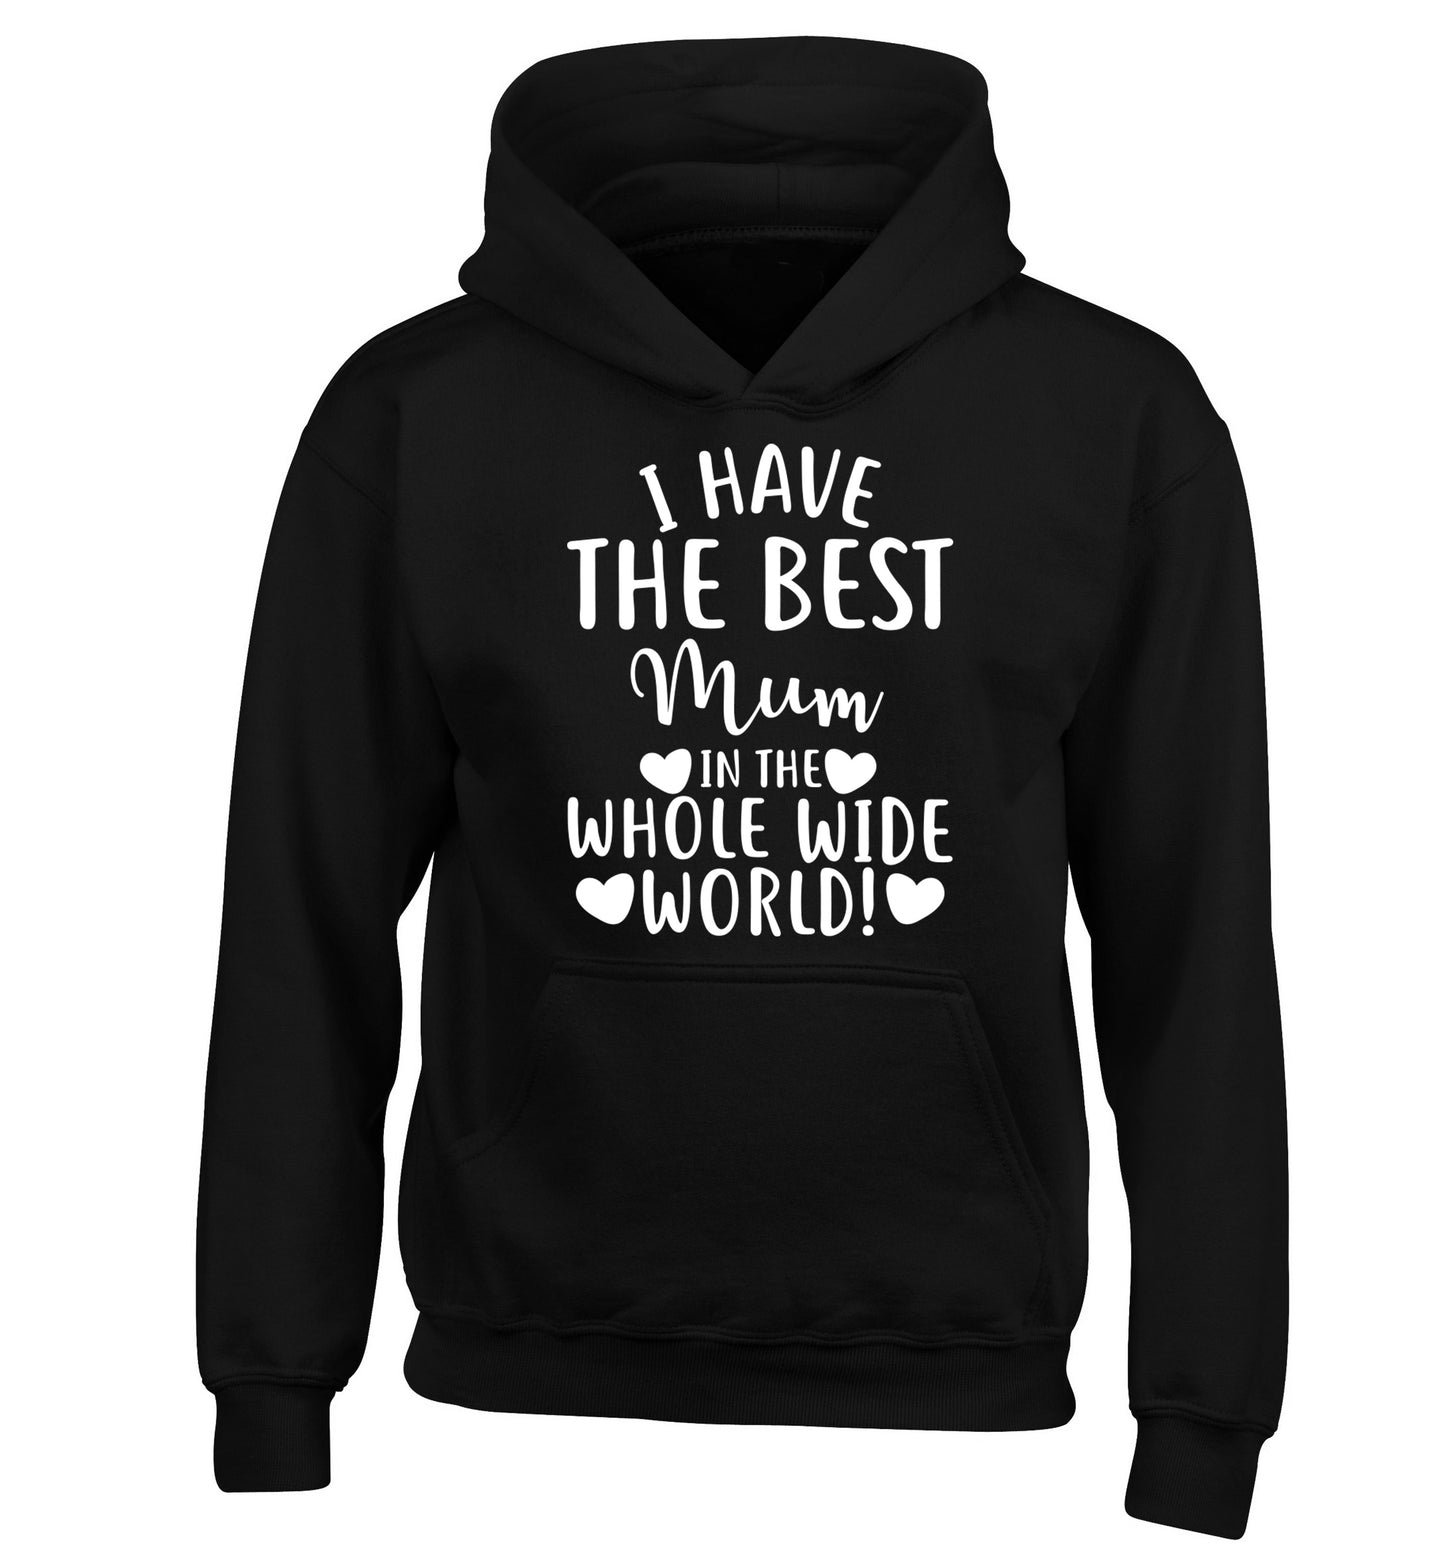 I have the best mum in the whole wide world! children's black hoodie 12-13 Years